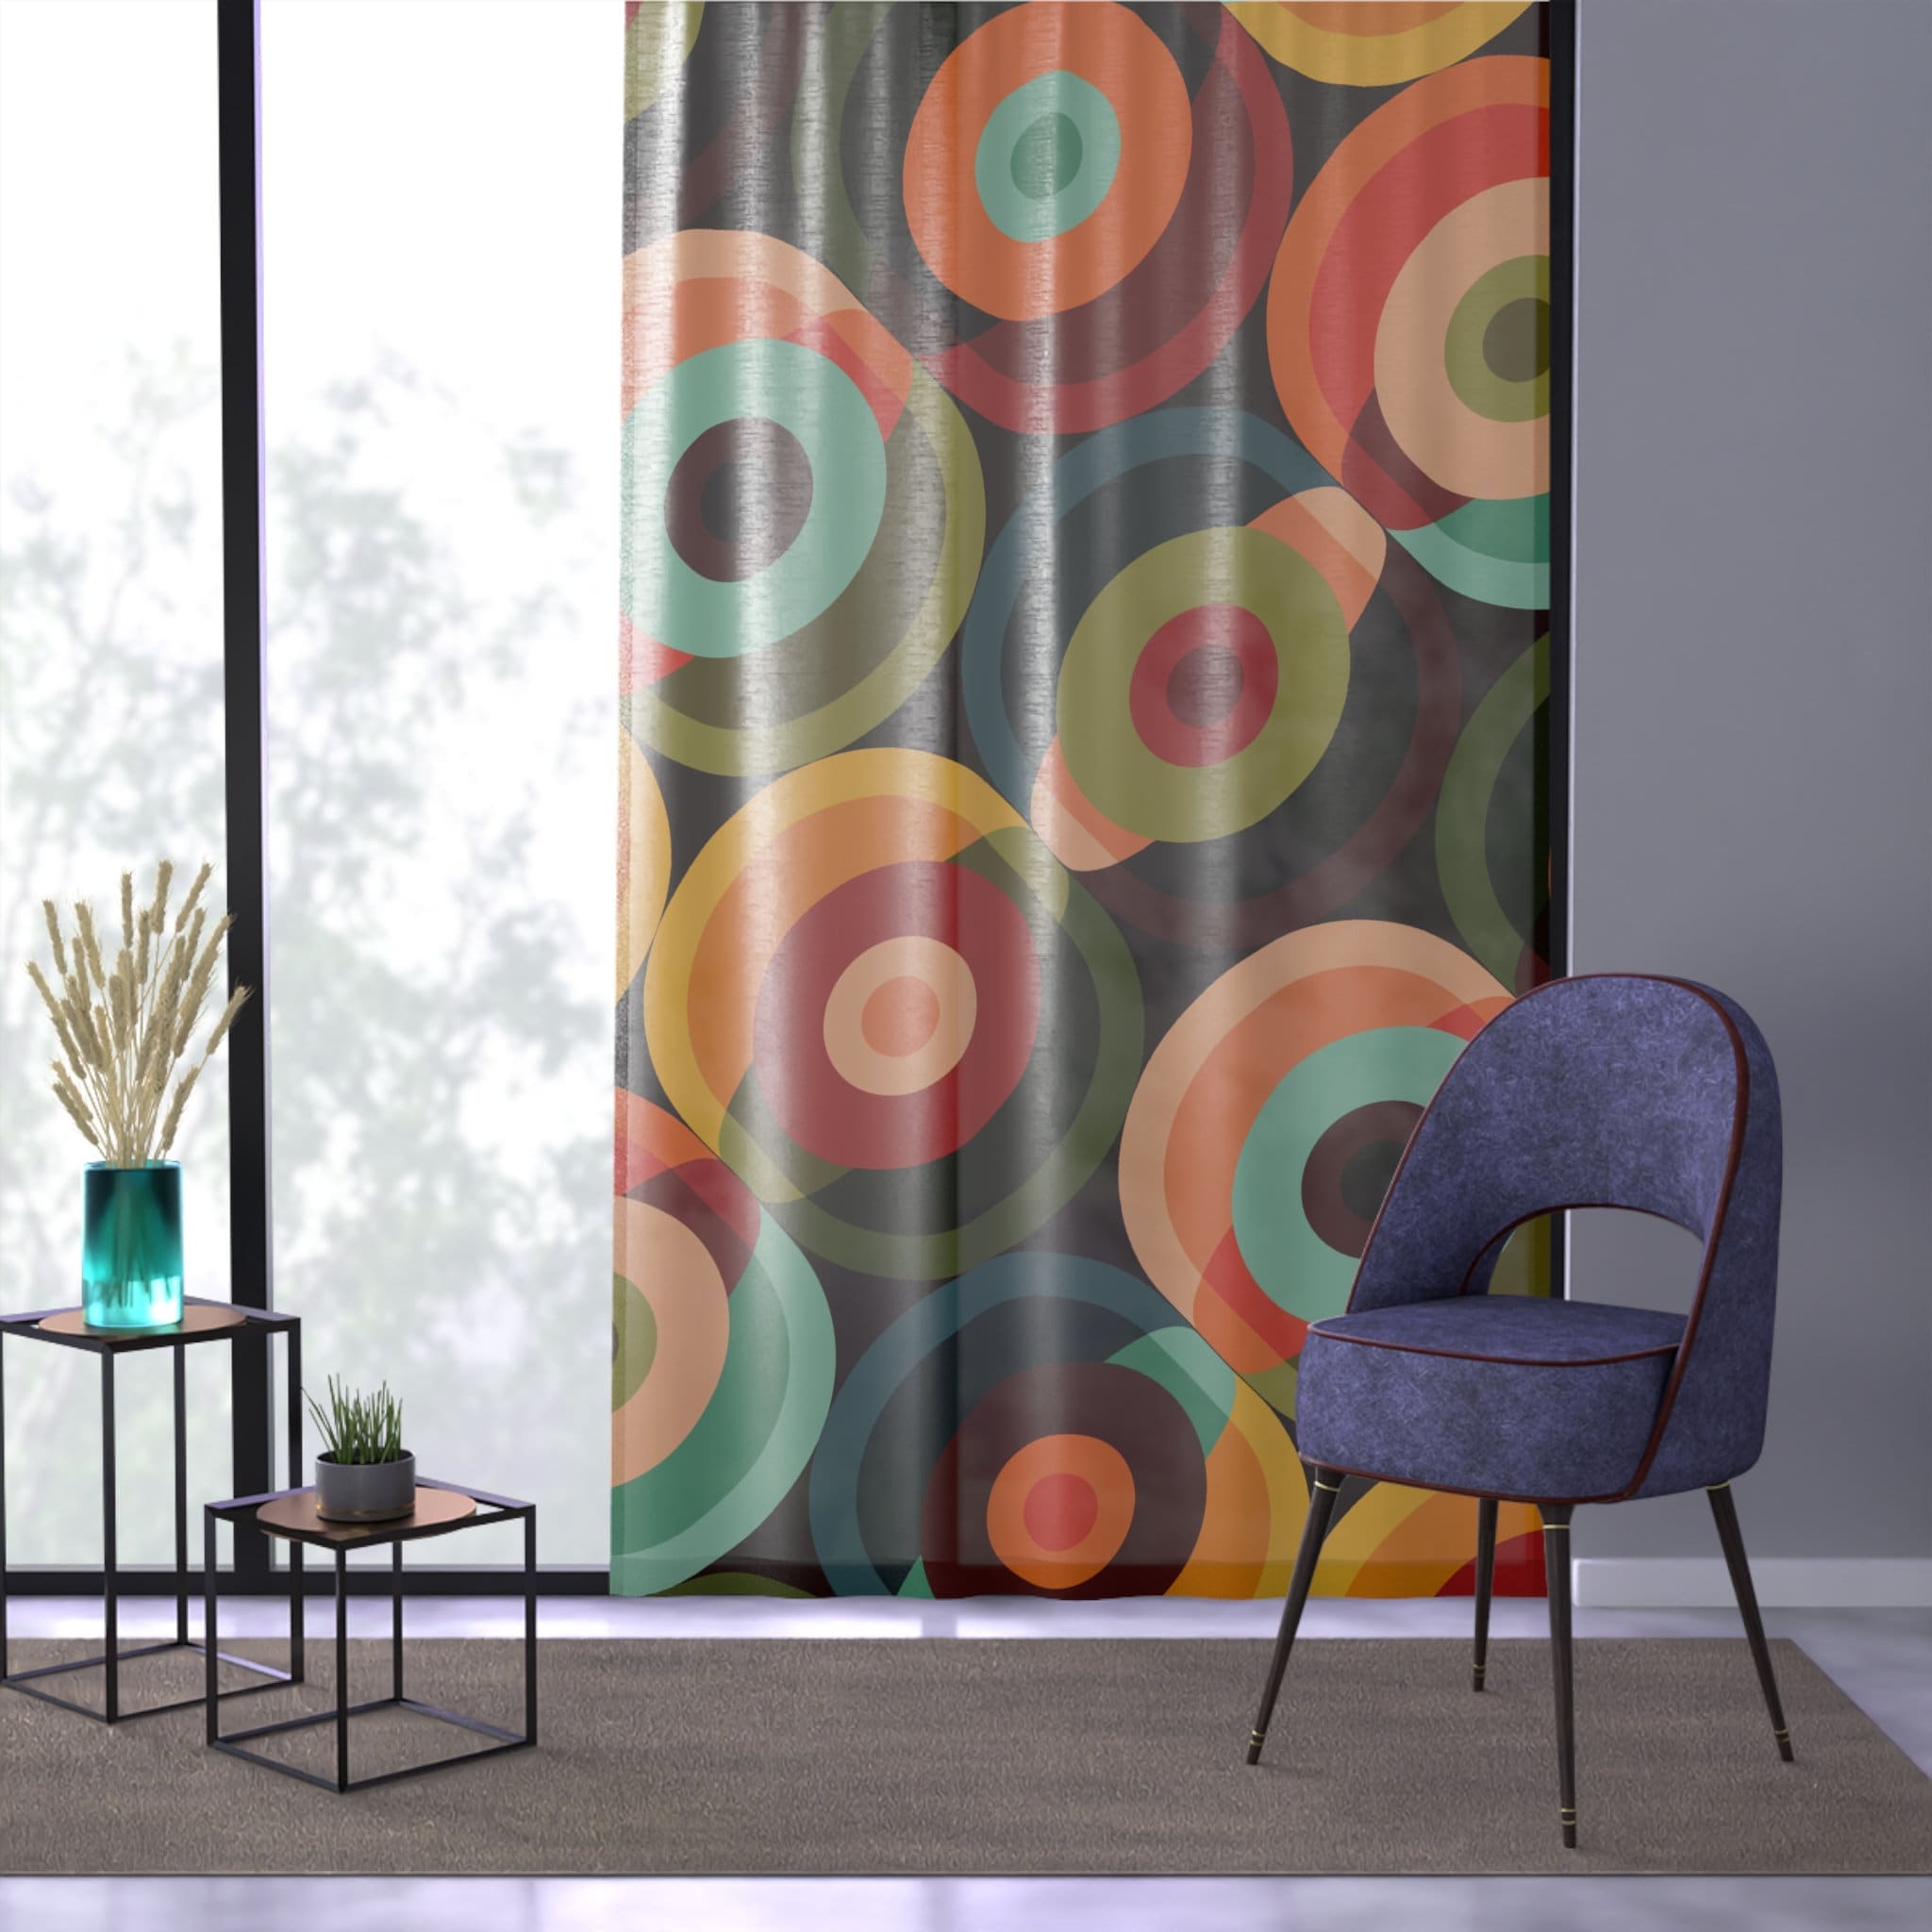 Kate McEnroe New York Retro Groovy Geometric Circle Orbs Window Curtains, 70s Mid Century Modern Psychedelic Abstract Curtain Panels - 132582823 Window Curtains